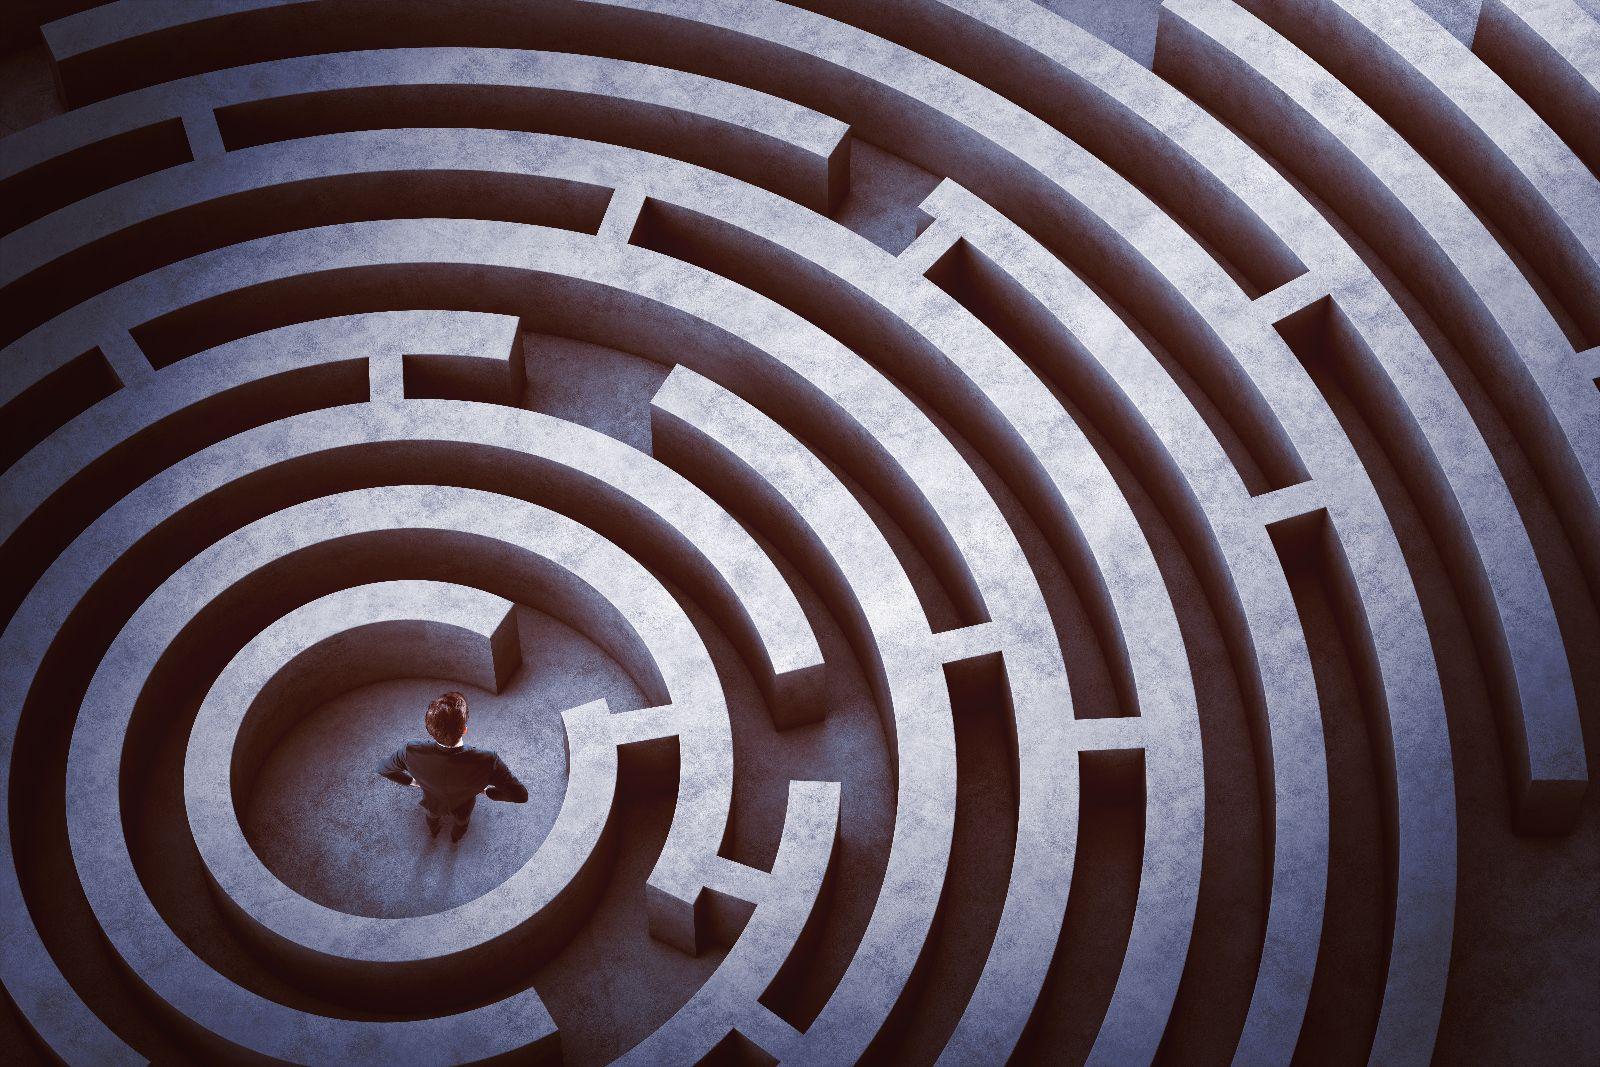 Man at center of a round-shaped maze